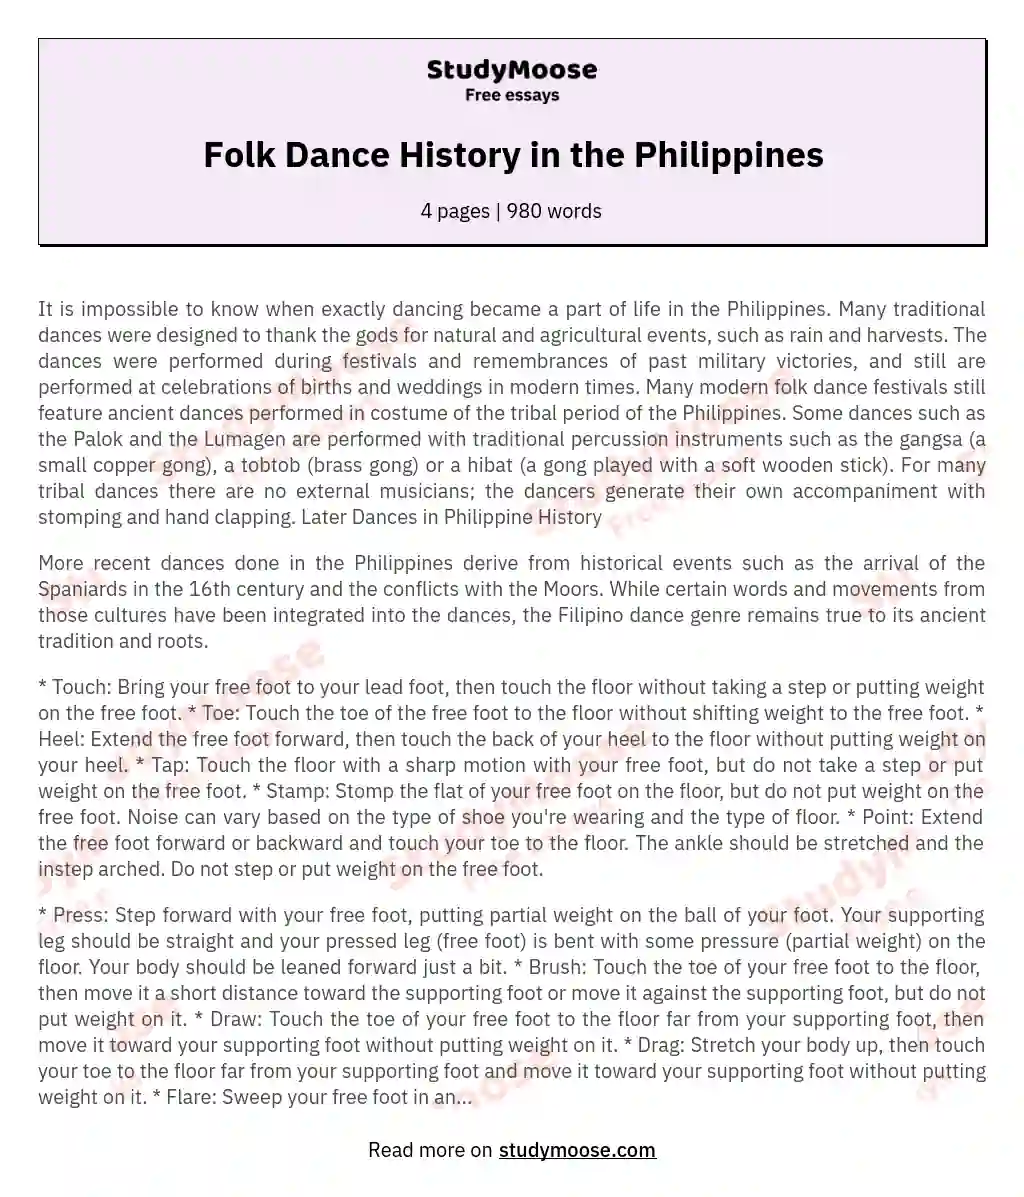 Folk Dance History in the Philippines essay